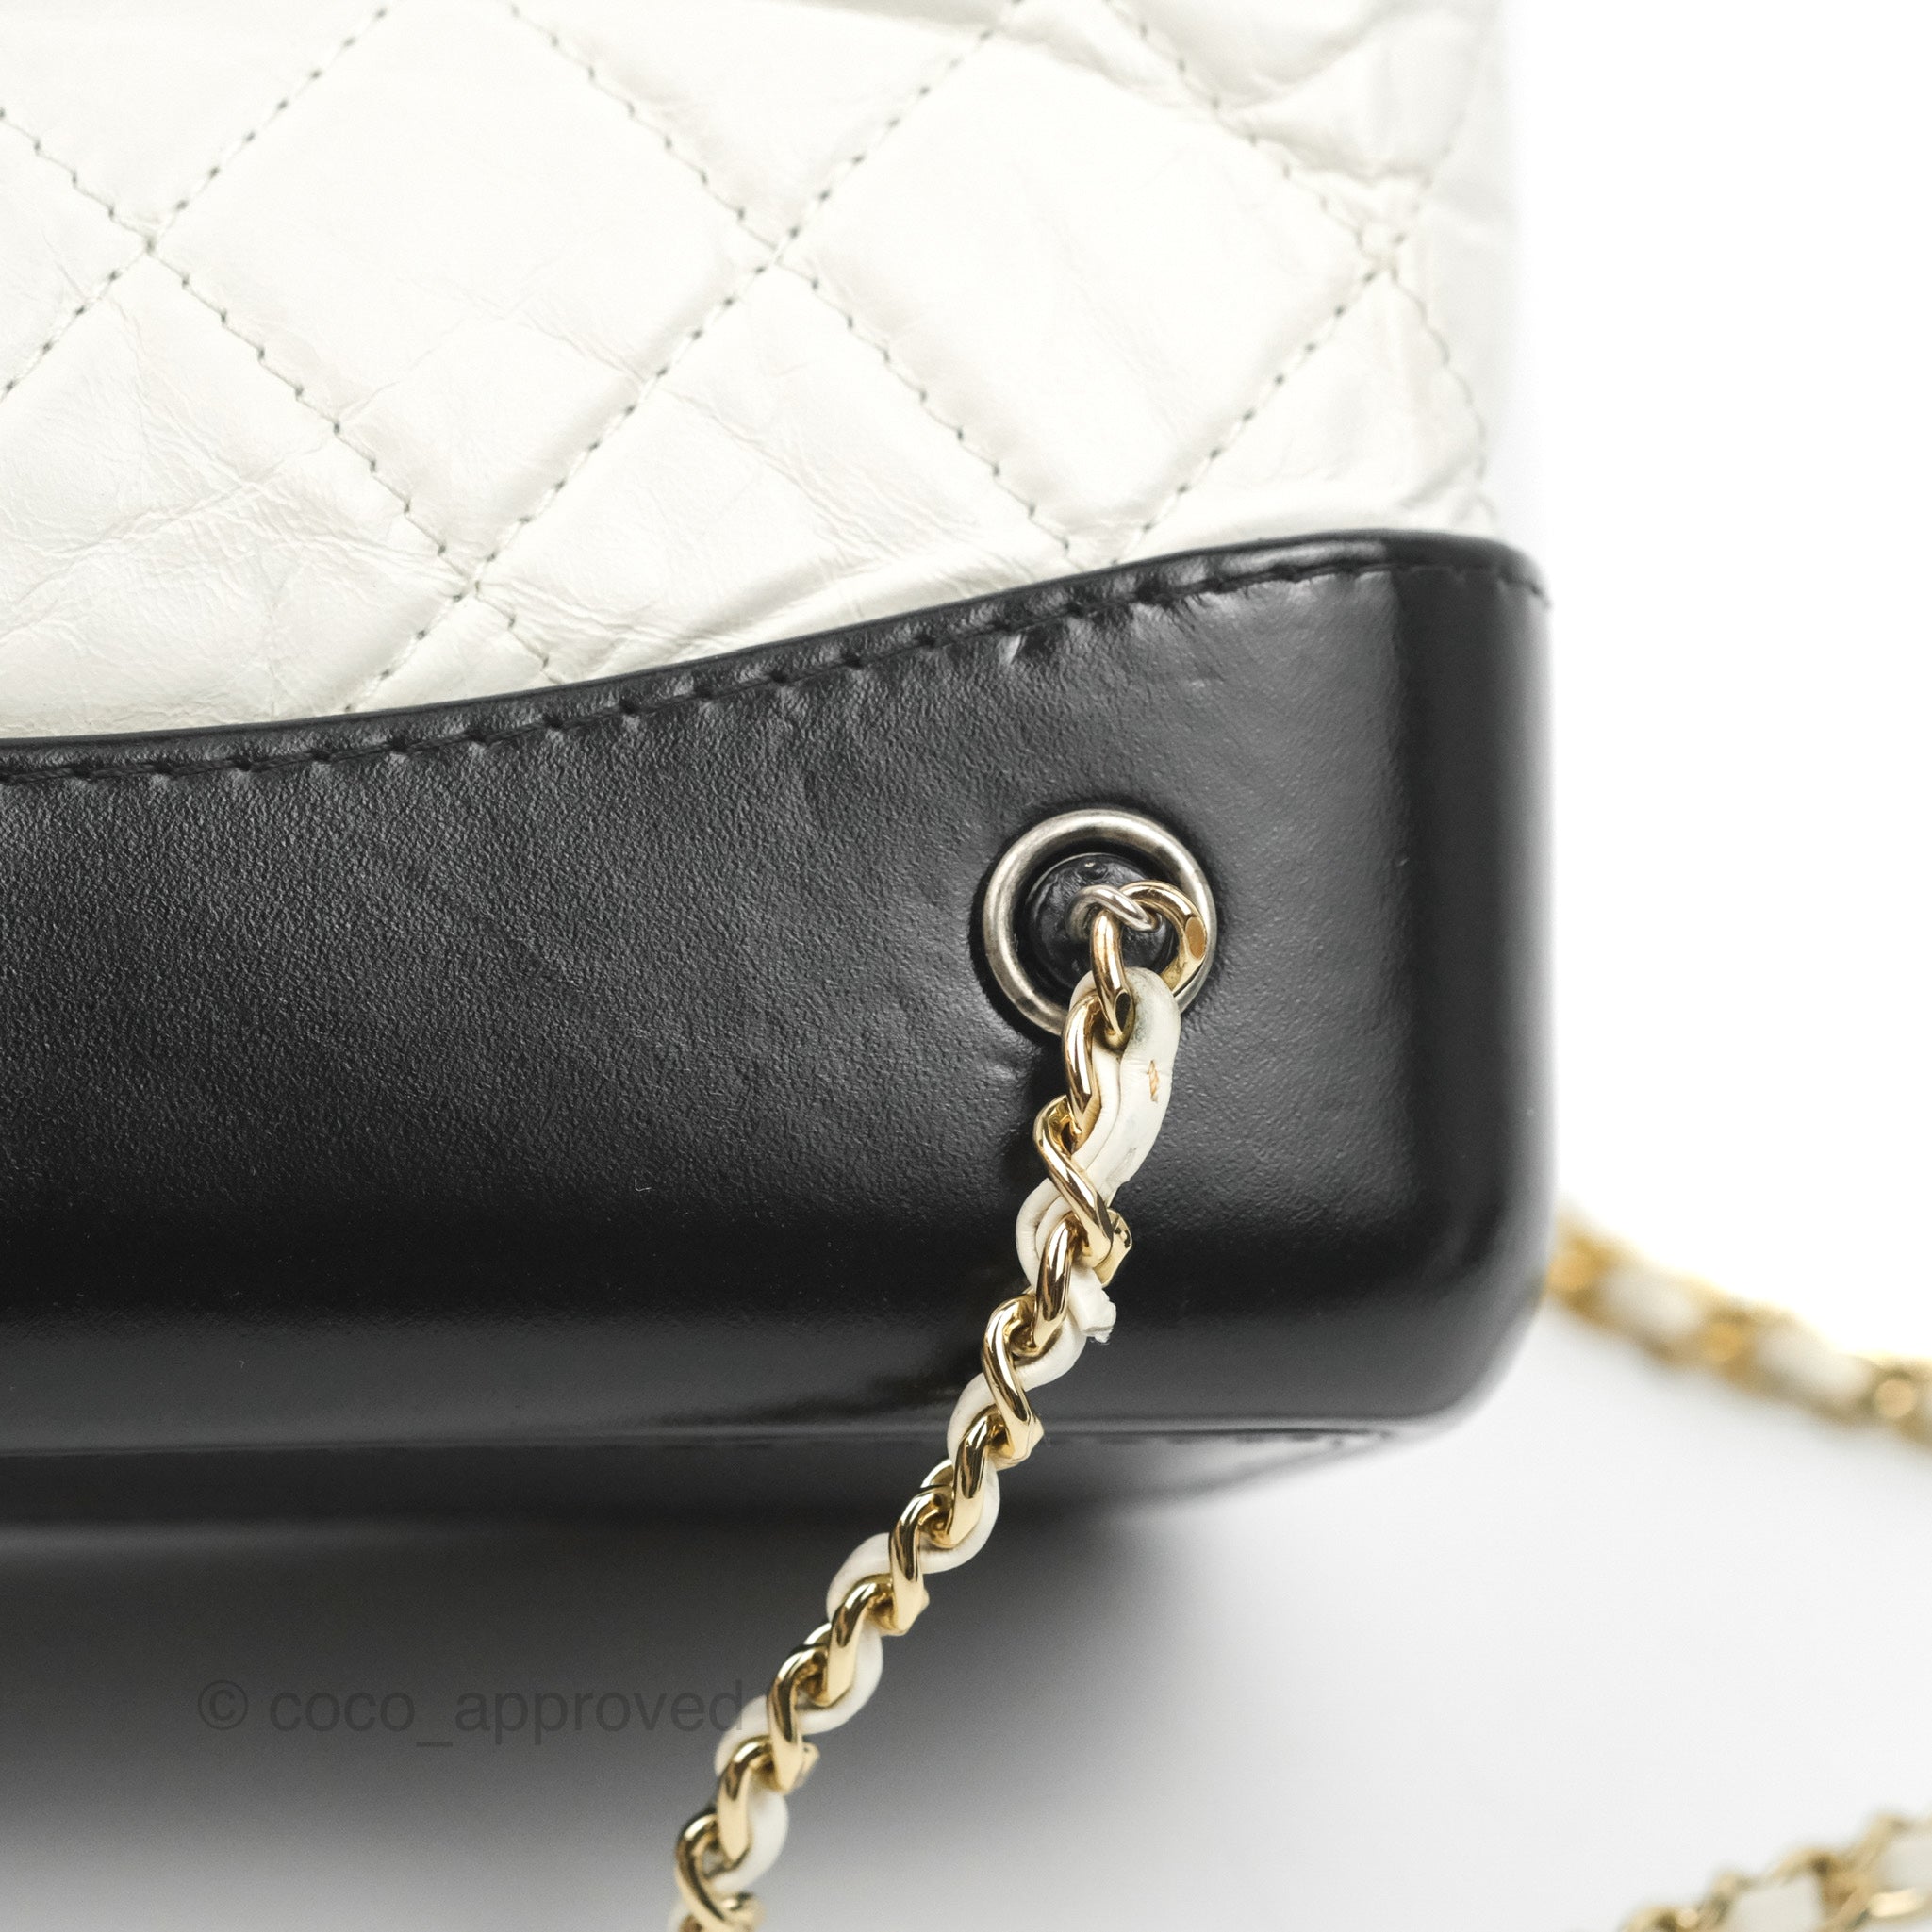 Sold at Auction: Chanel - Gabrielle Large Bag - White Leather CC